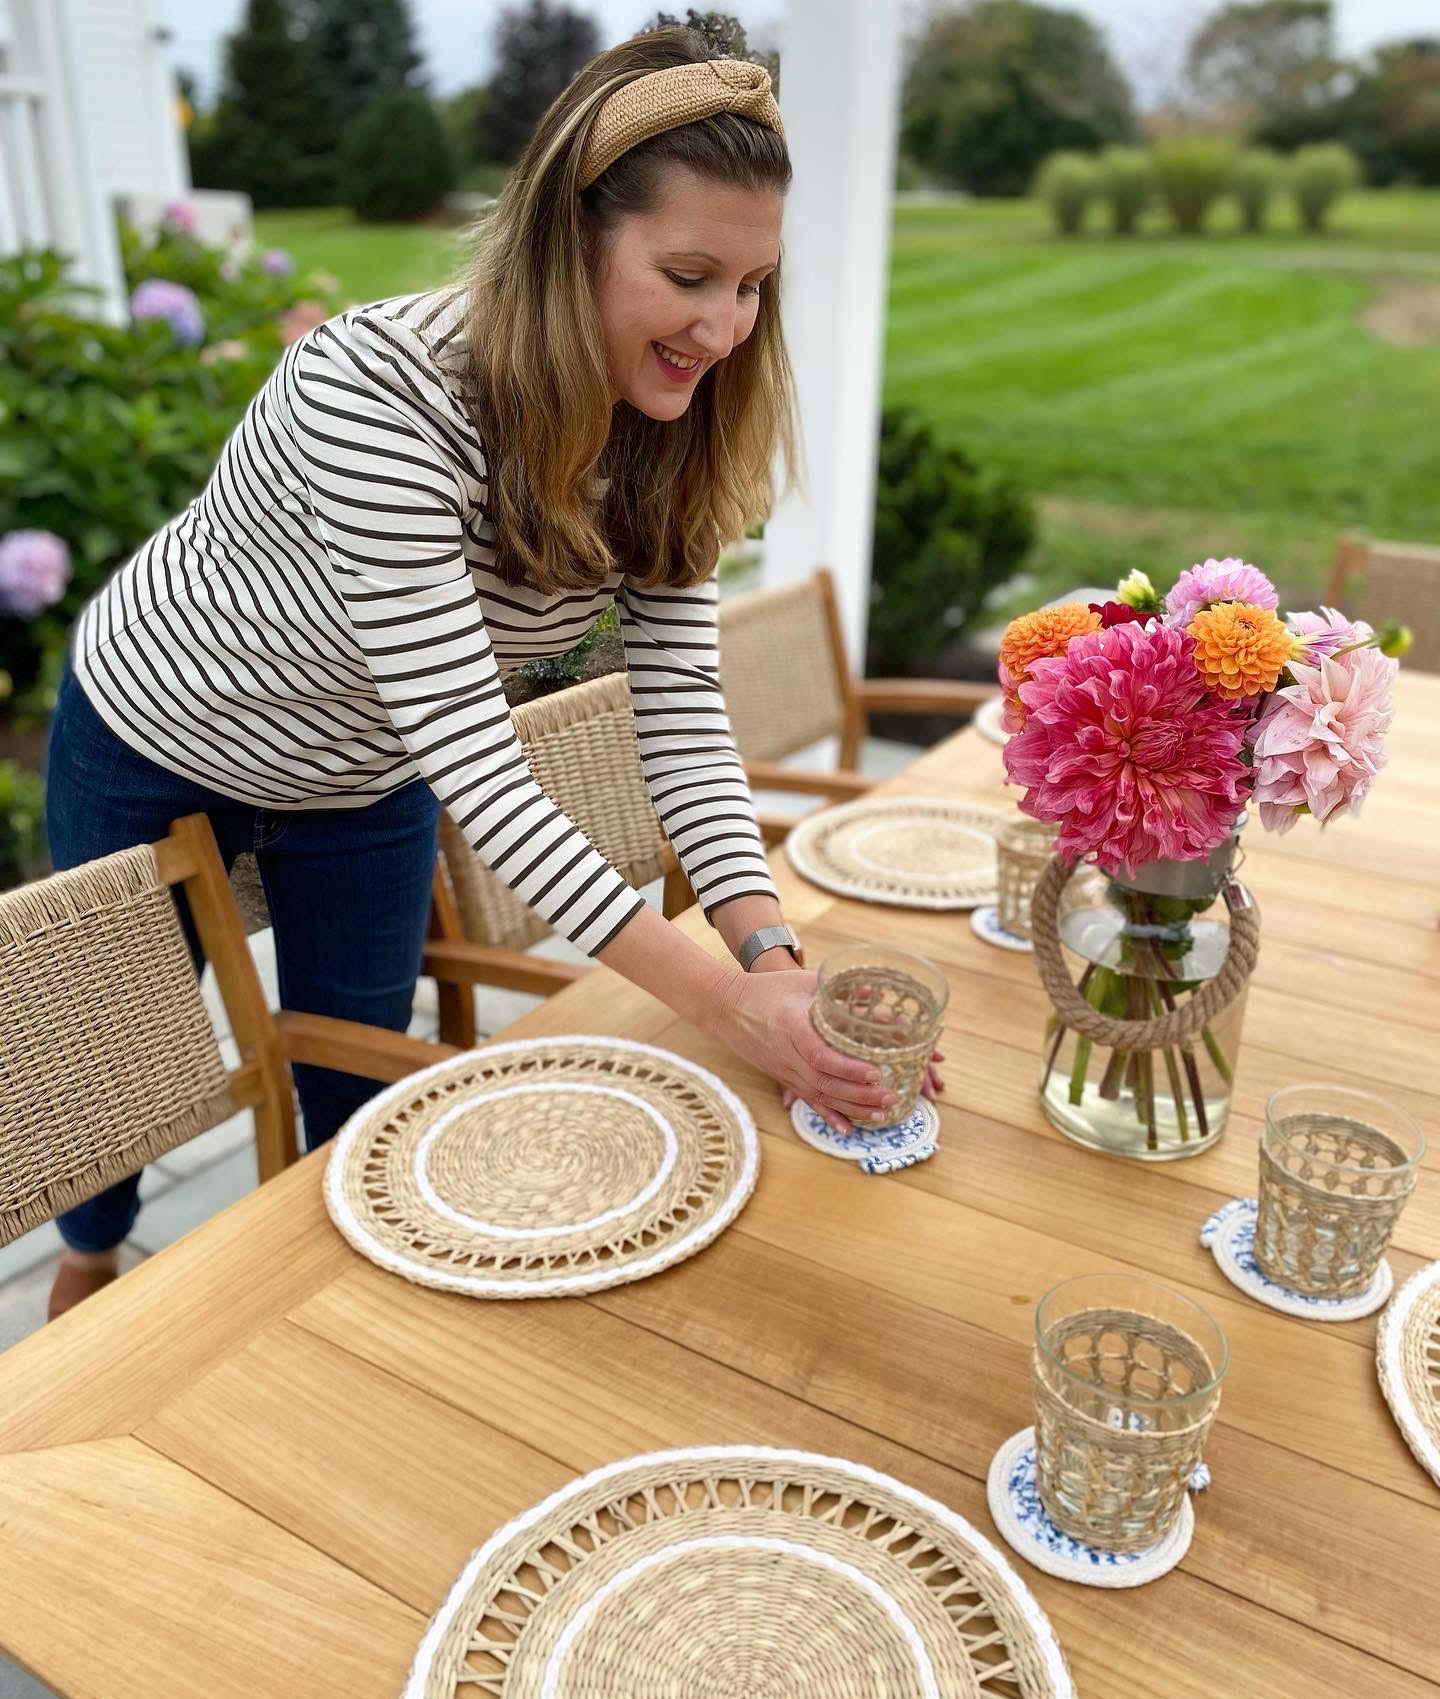 Roula Rallis setting a Horizon teak table with hand woven placemats